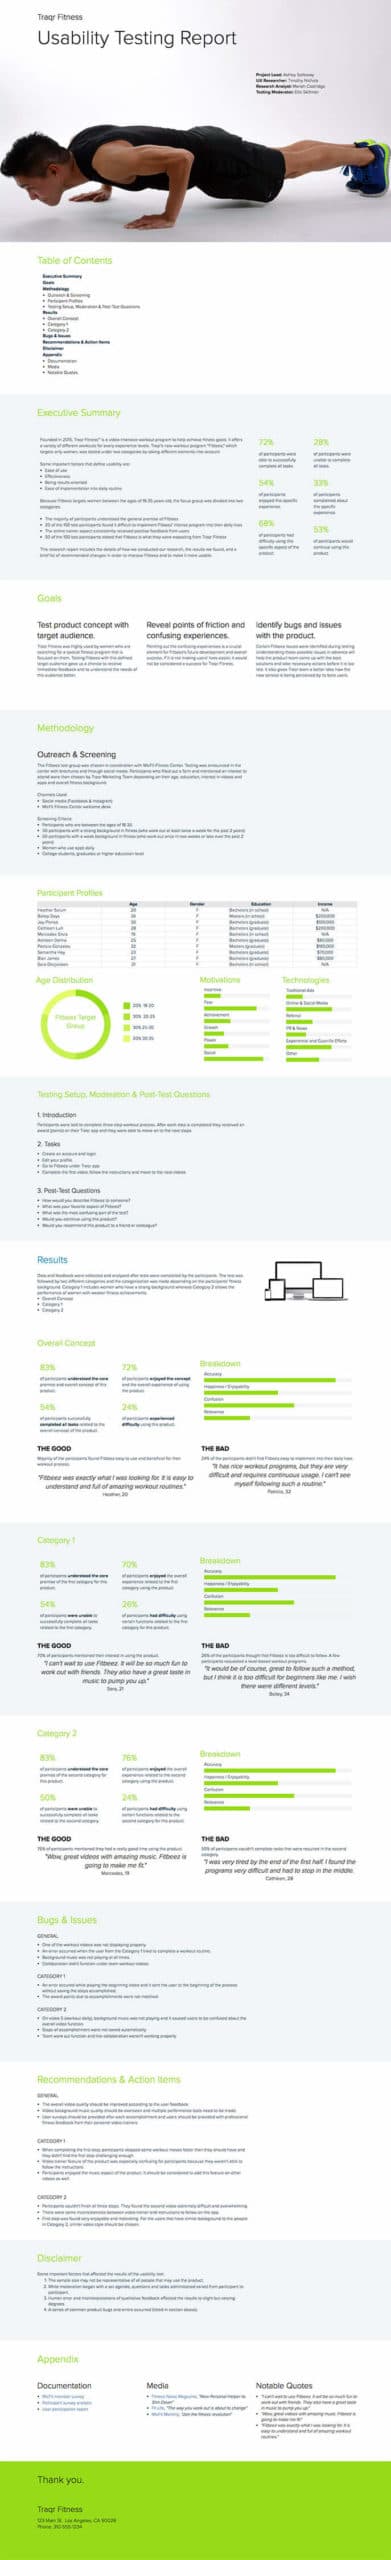 Usability Testing Report Example Traqr